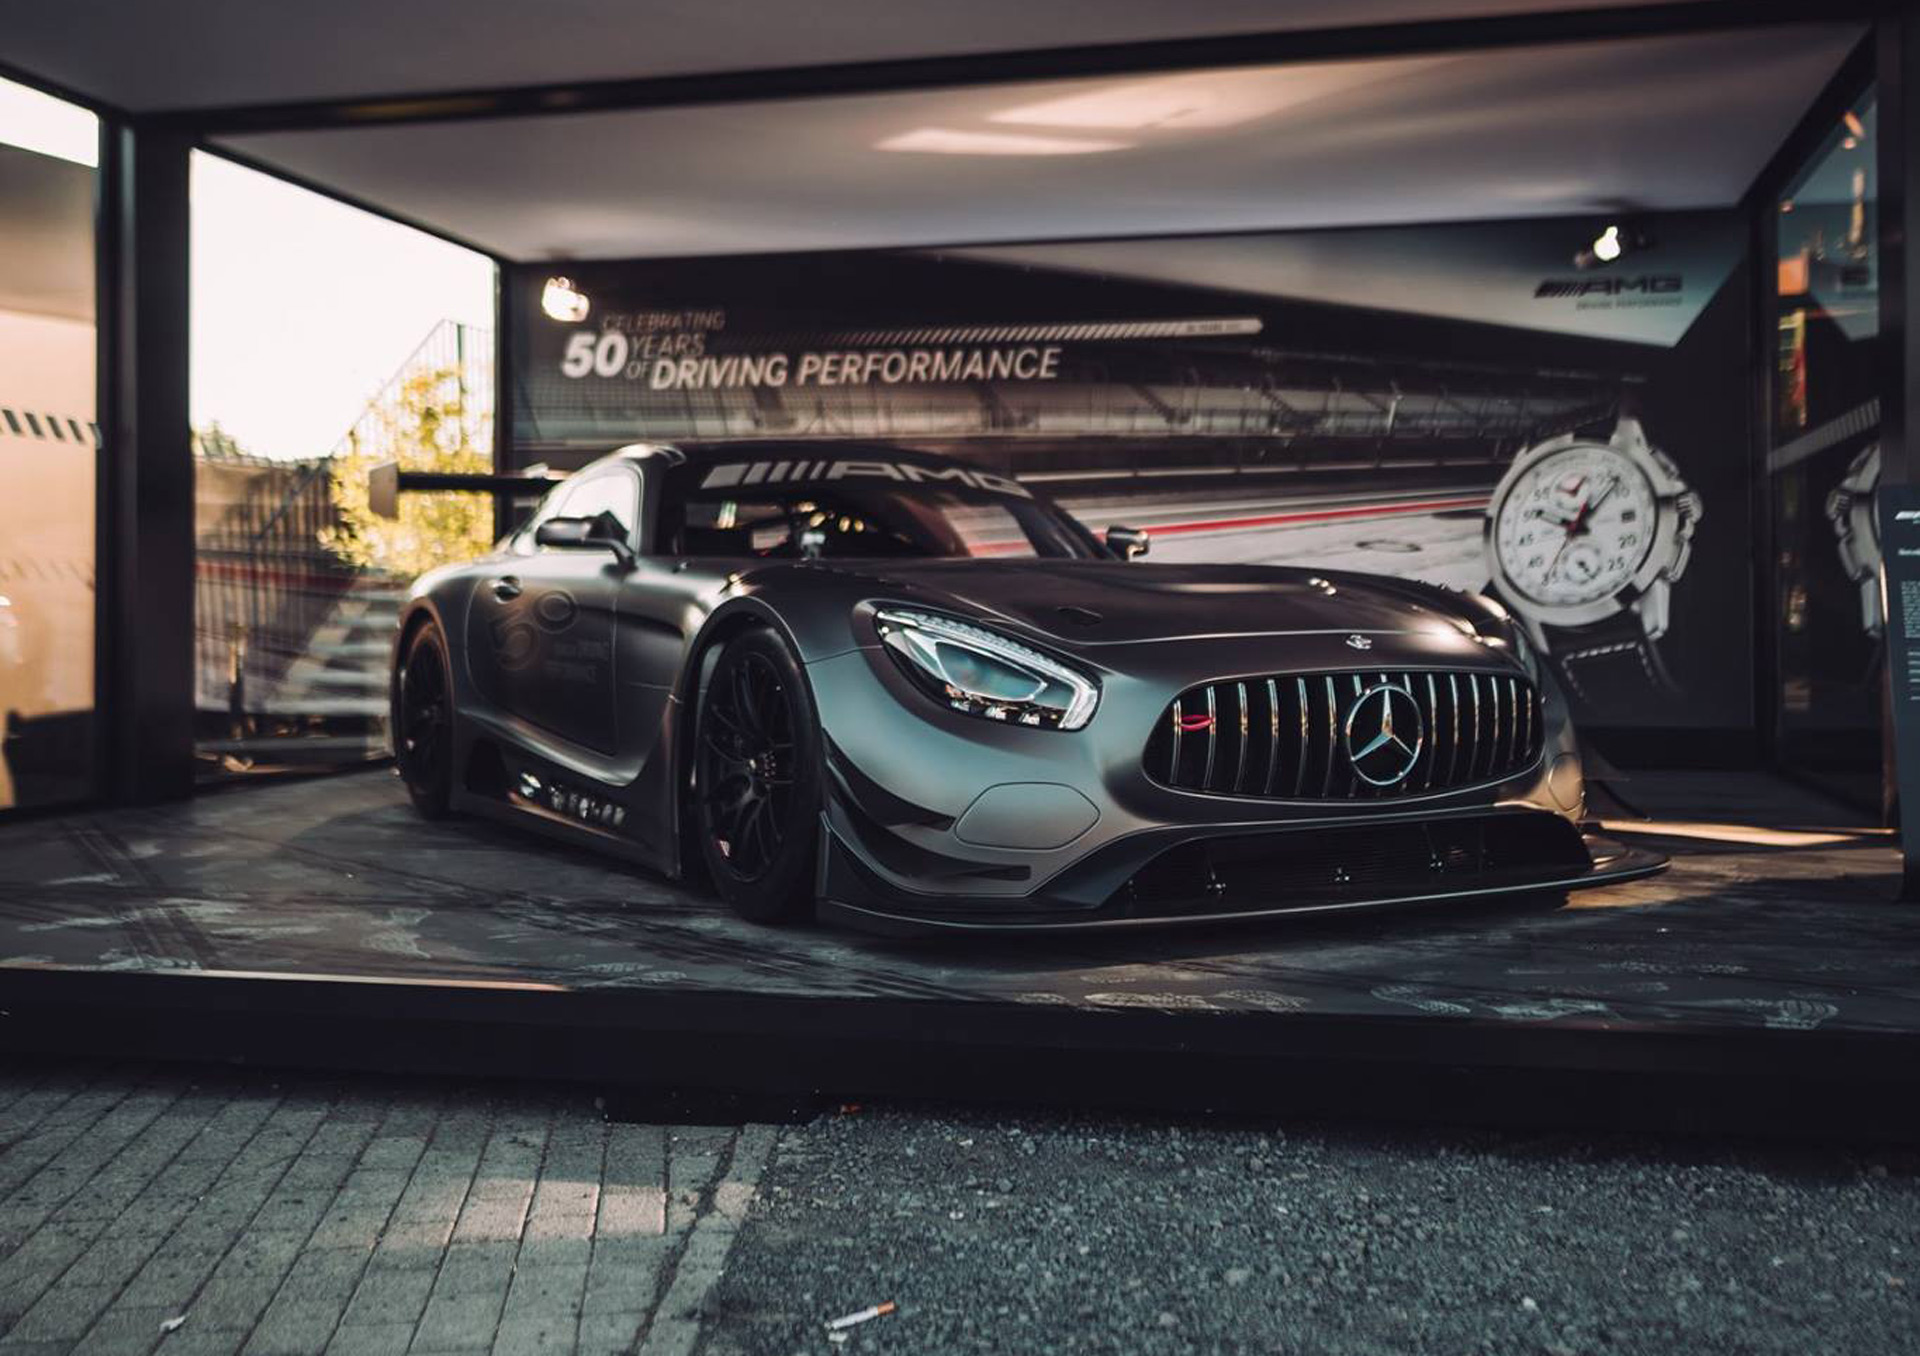 17 Mercedes Amg Gt3 Edition 50 Debuts Limited To 5 Cars